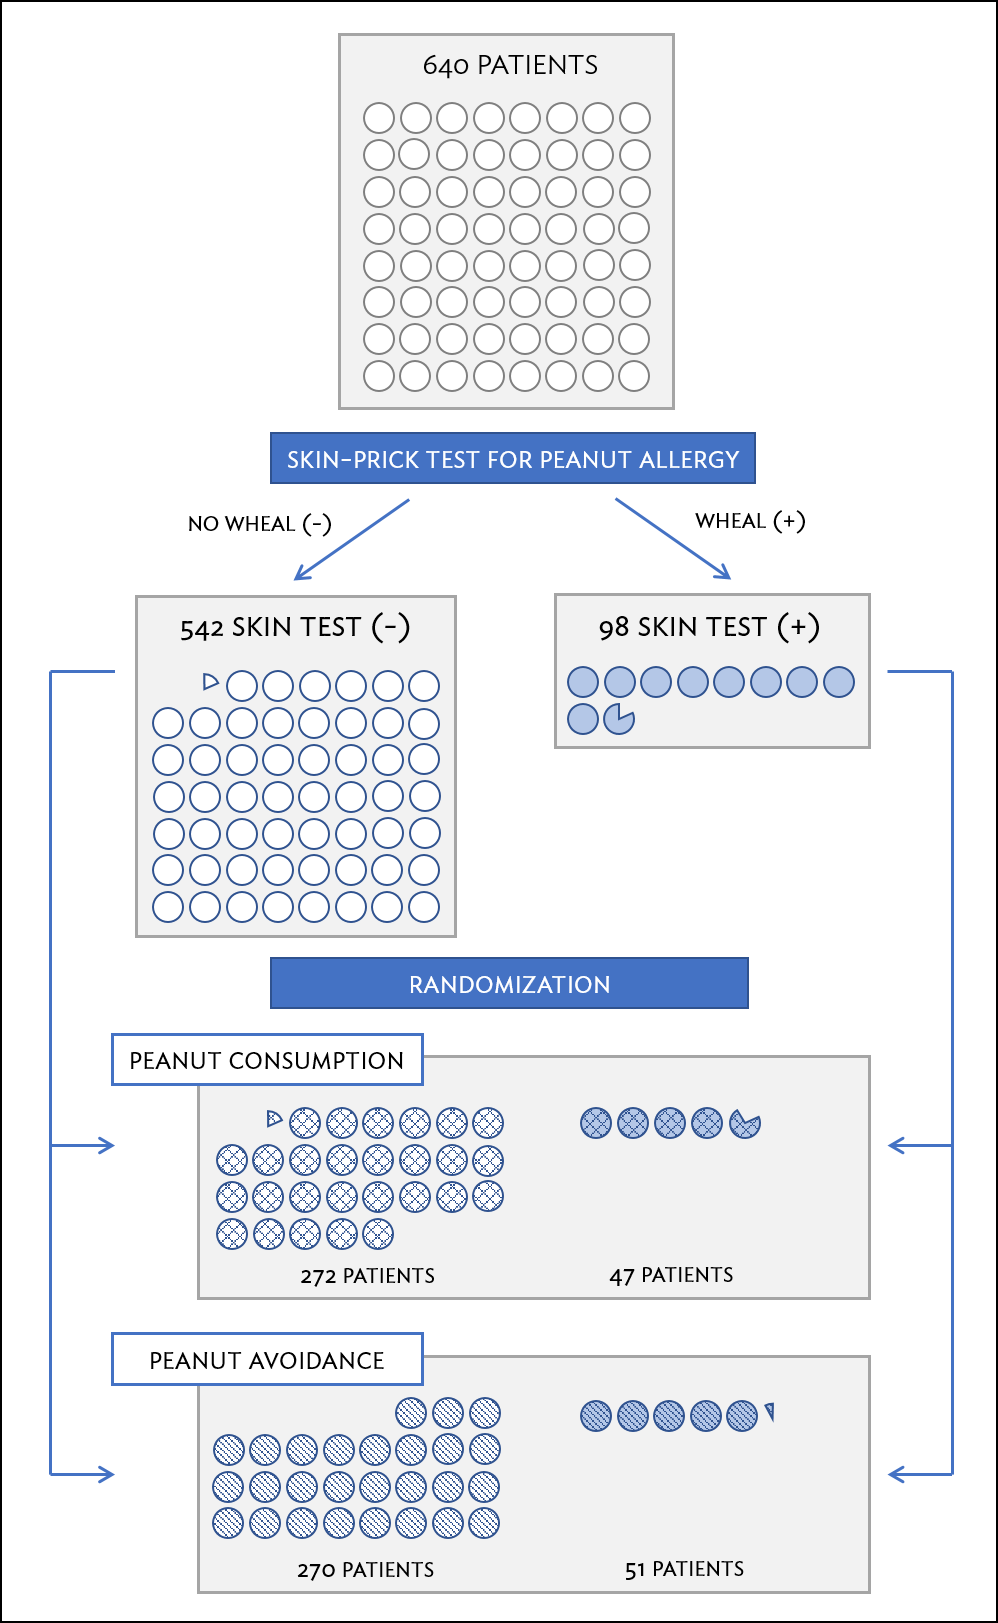 A simplified schematic of the blocking scheme used in the LEAP study, depicting 640 patients that underwent randomization. Patients are first divided into blocks based on response to the initial skin test, then each block is randomized between the avoidance and consumption groups. This strategy ensures an even representation of patients in each group who had positive and negative skin tests.